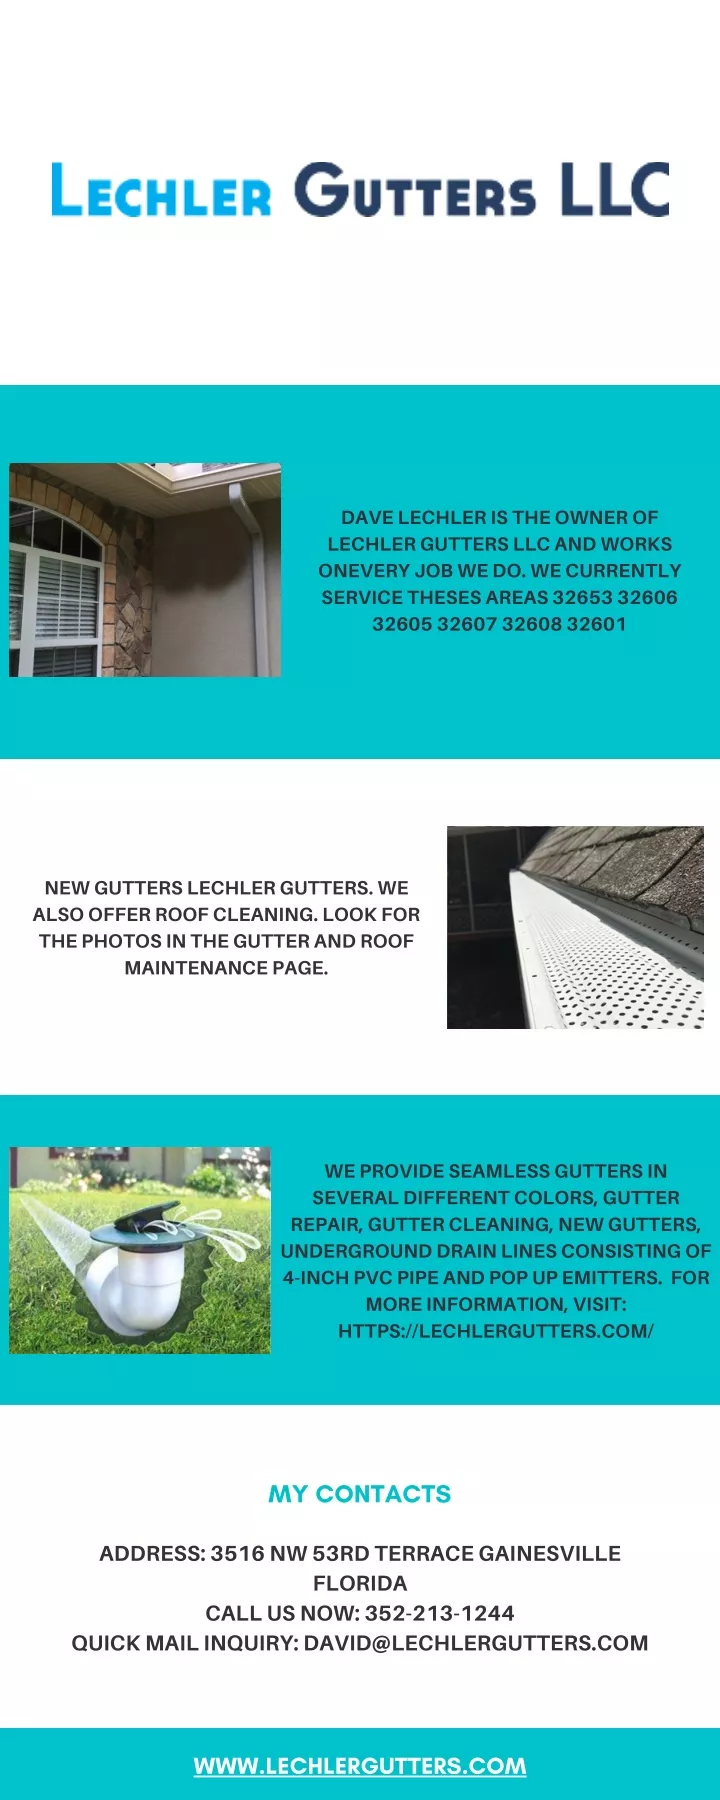 dave lechler is the owner of lechler gutters